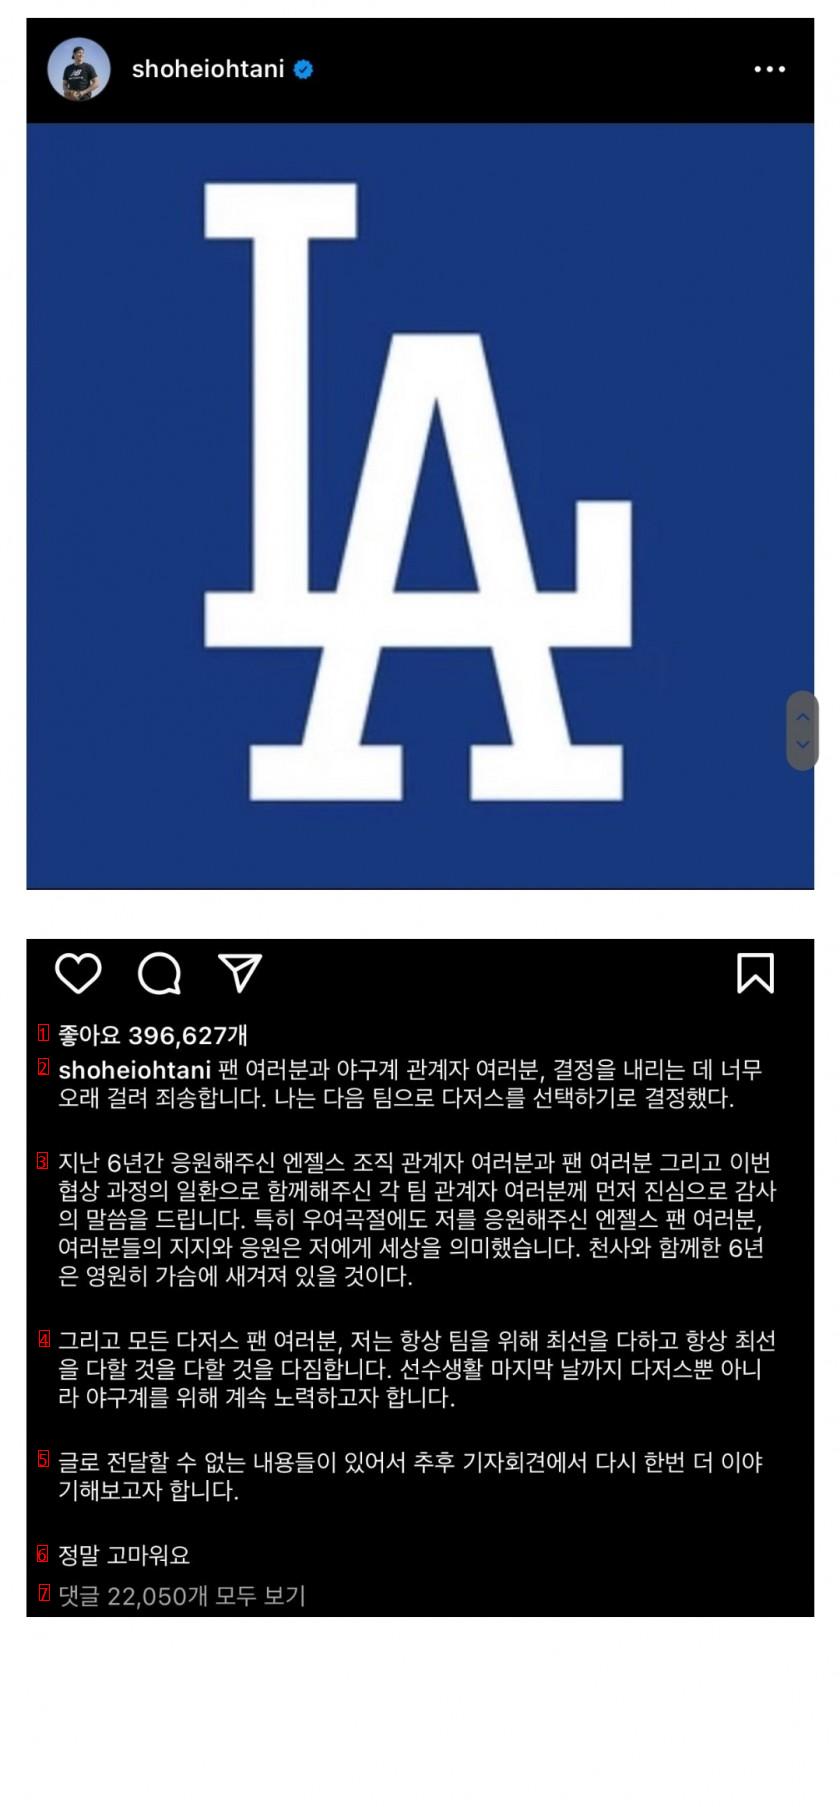 Shohei Ohtani's Instagram entry to the LA Dodgers